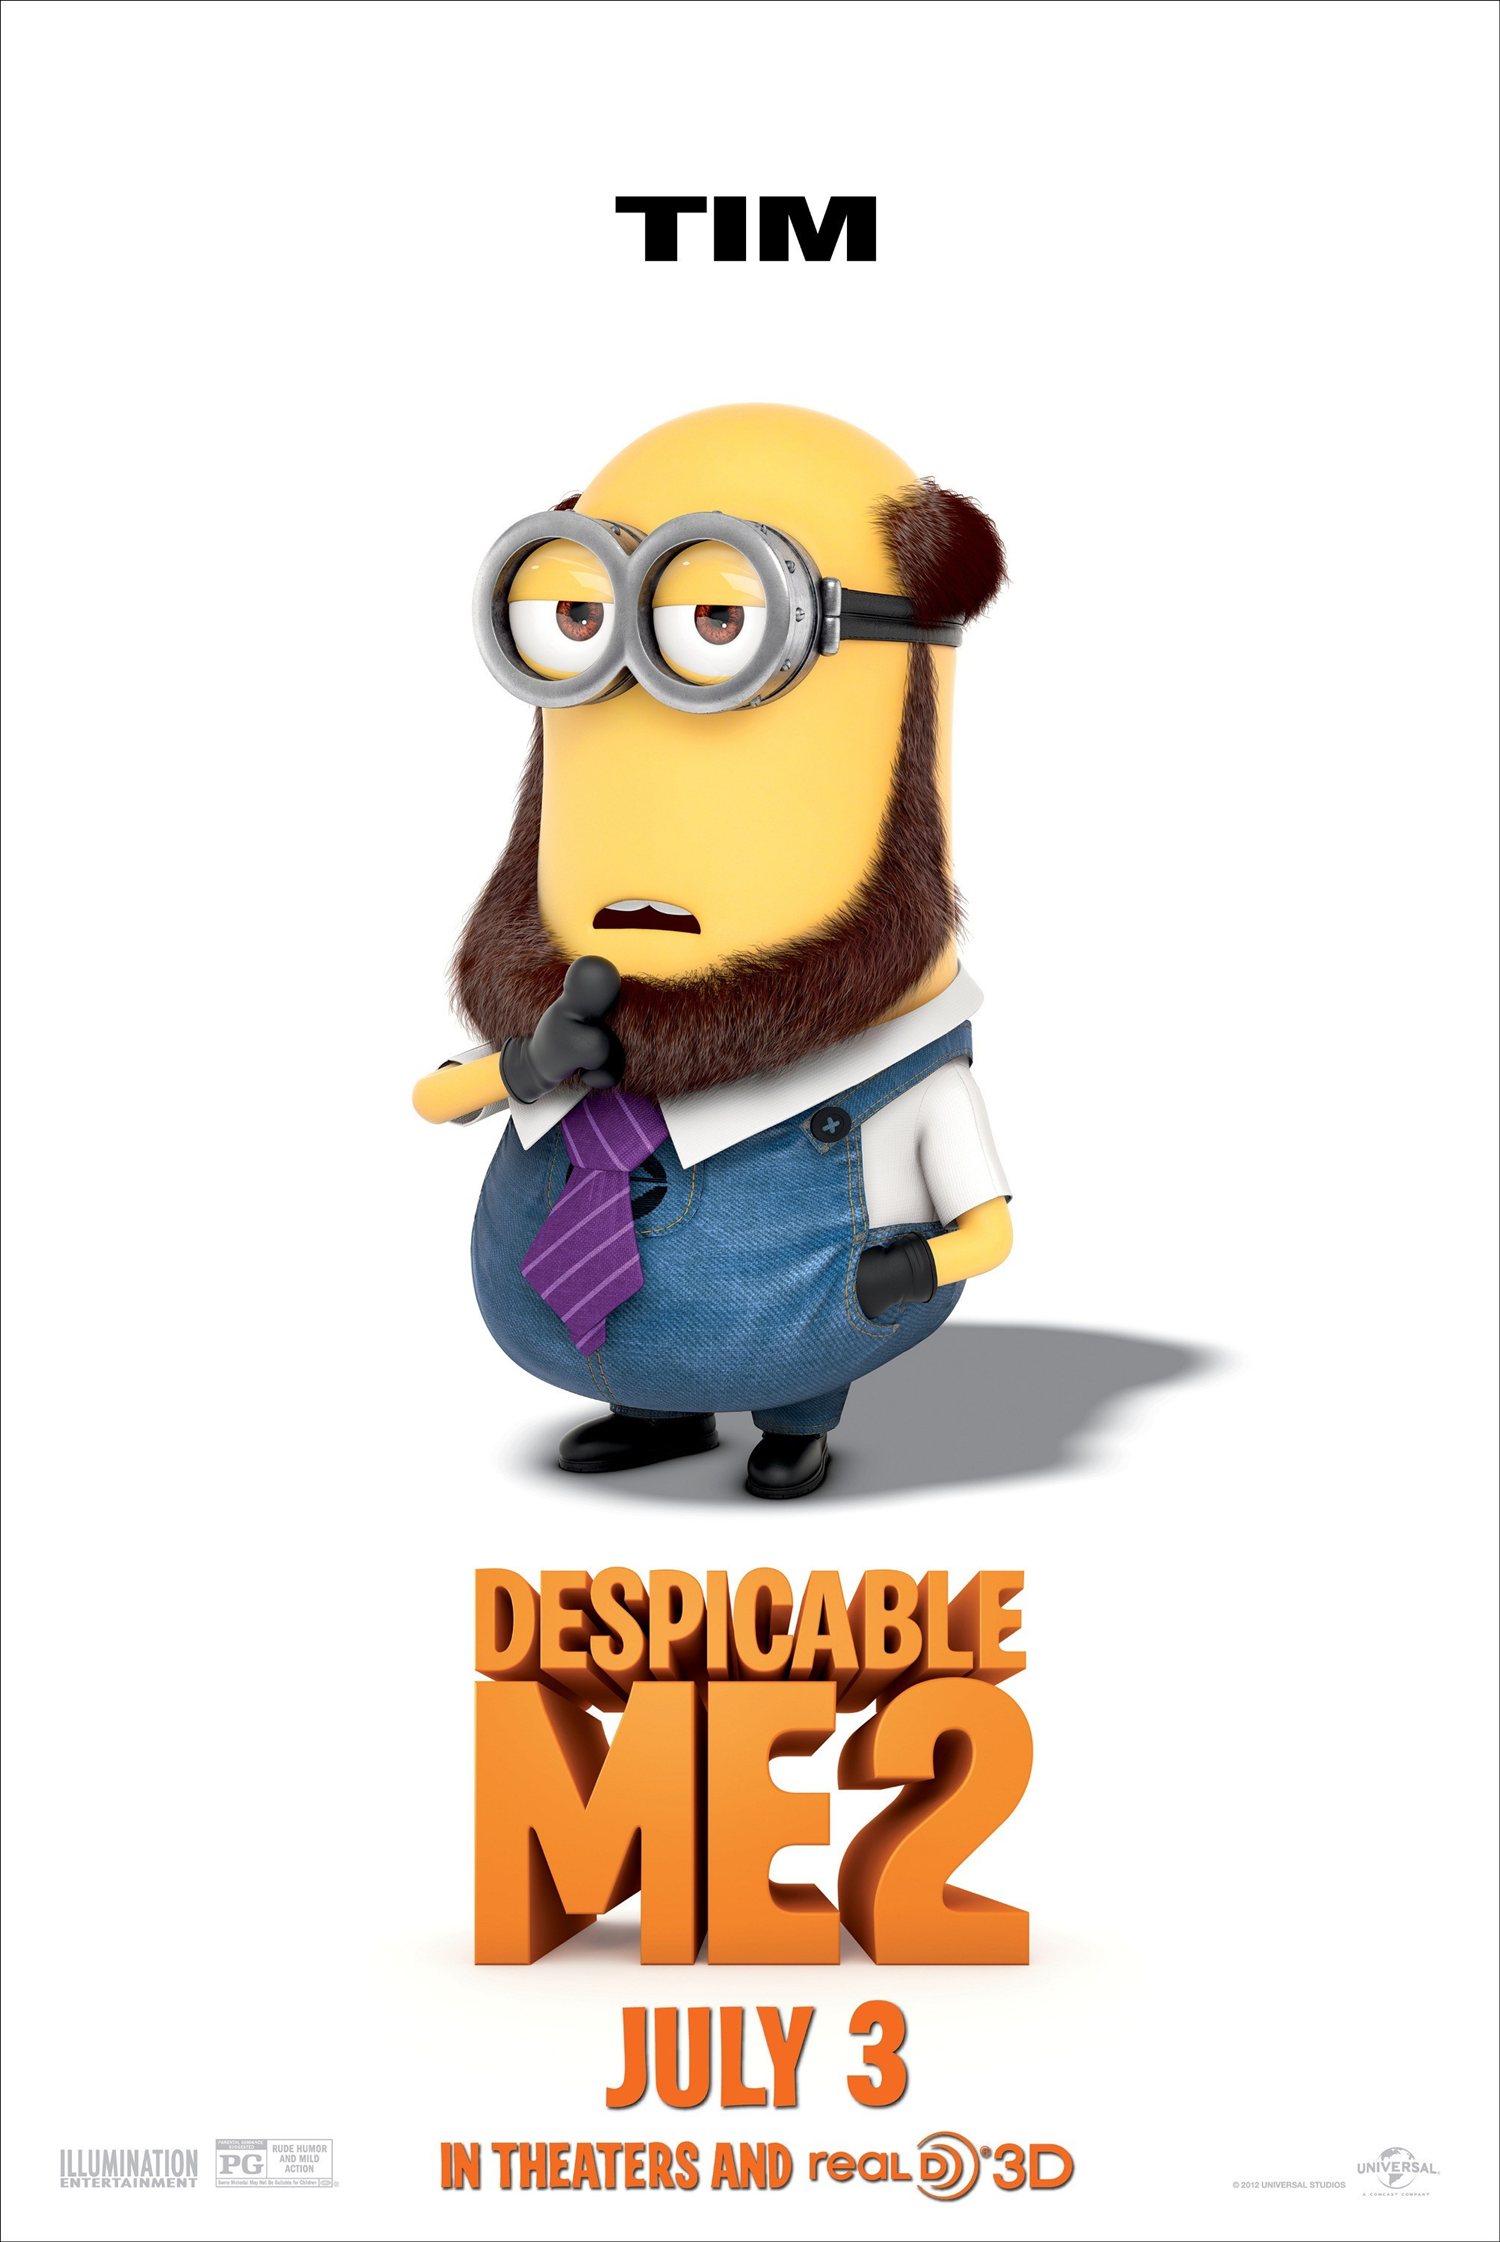 Minions/Gallery | Despicable Me Wiki | Fandom powered by Wikia